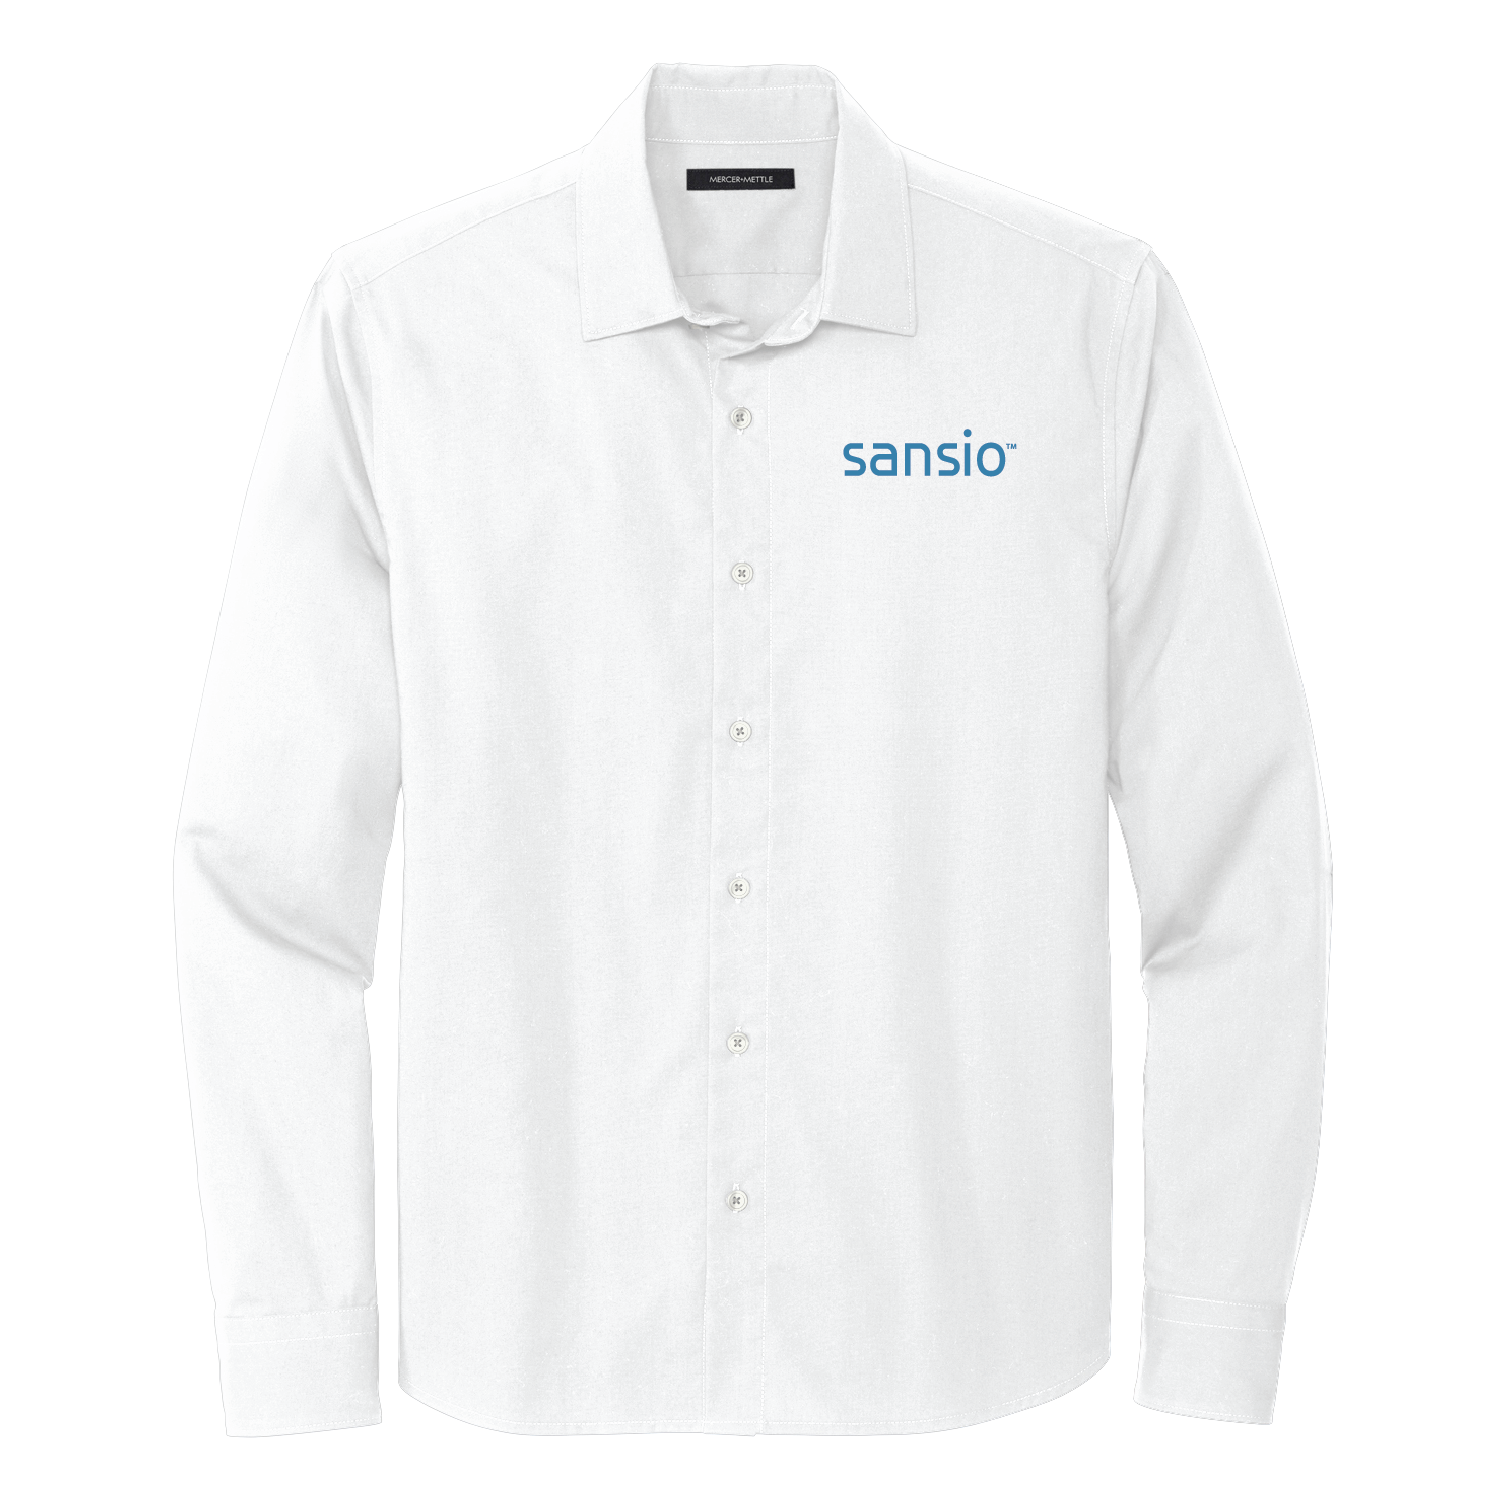 Sansio Long Sleeve Stretch Woven Shirt - DSP On Demand